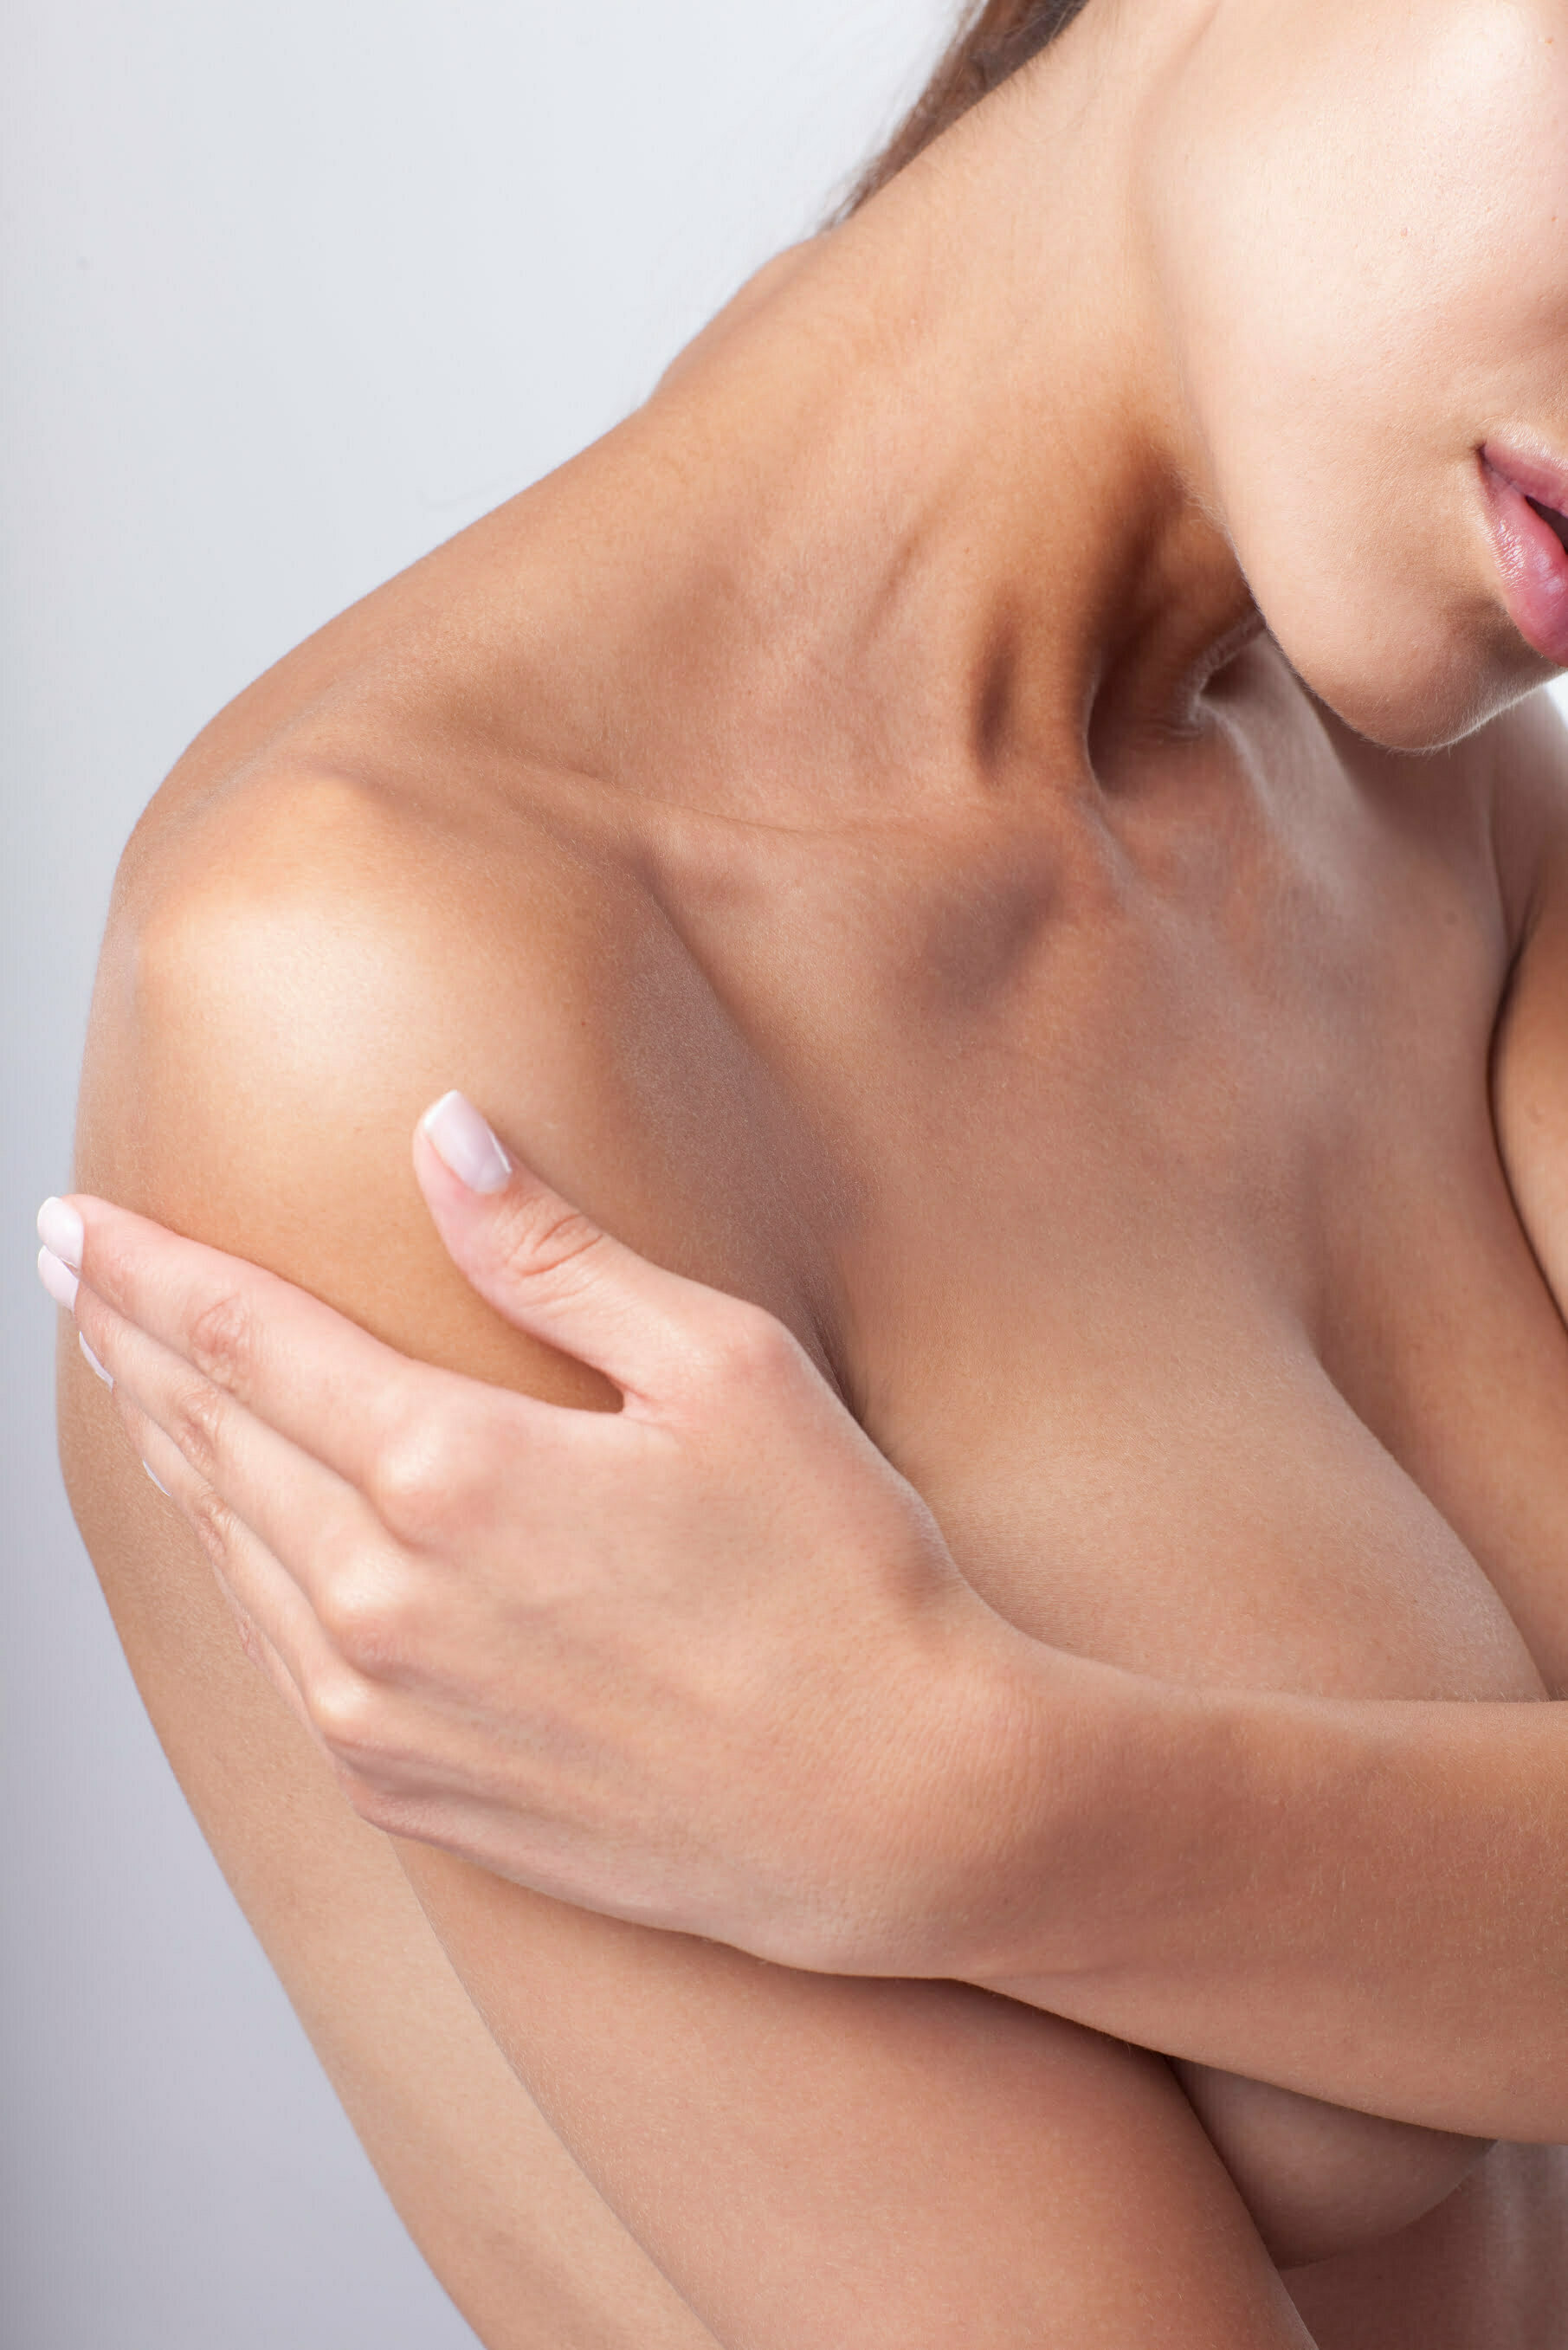 Interested in Breast Augmentation Without the Scars? We've Got You